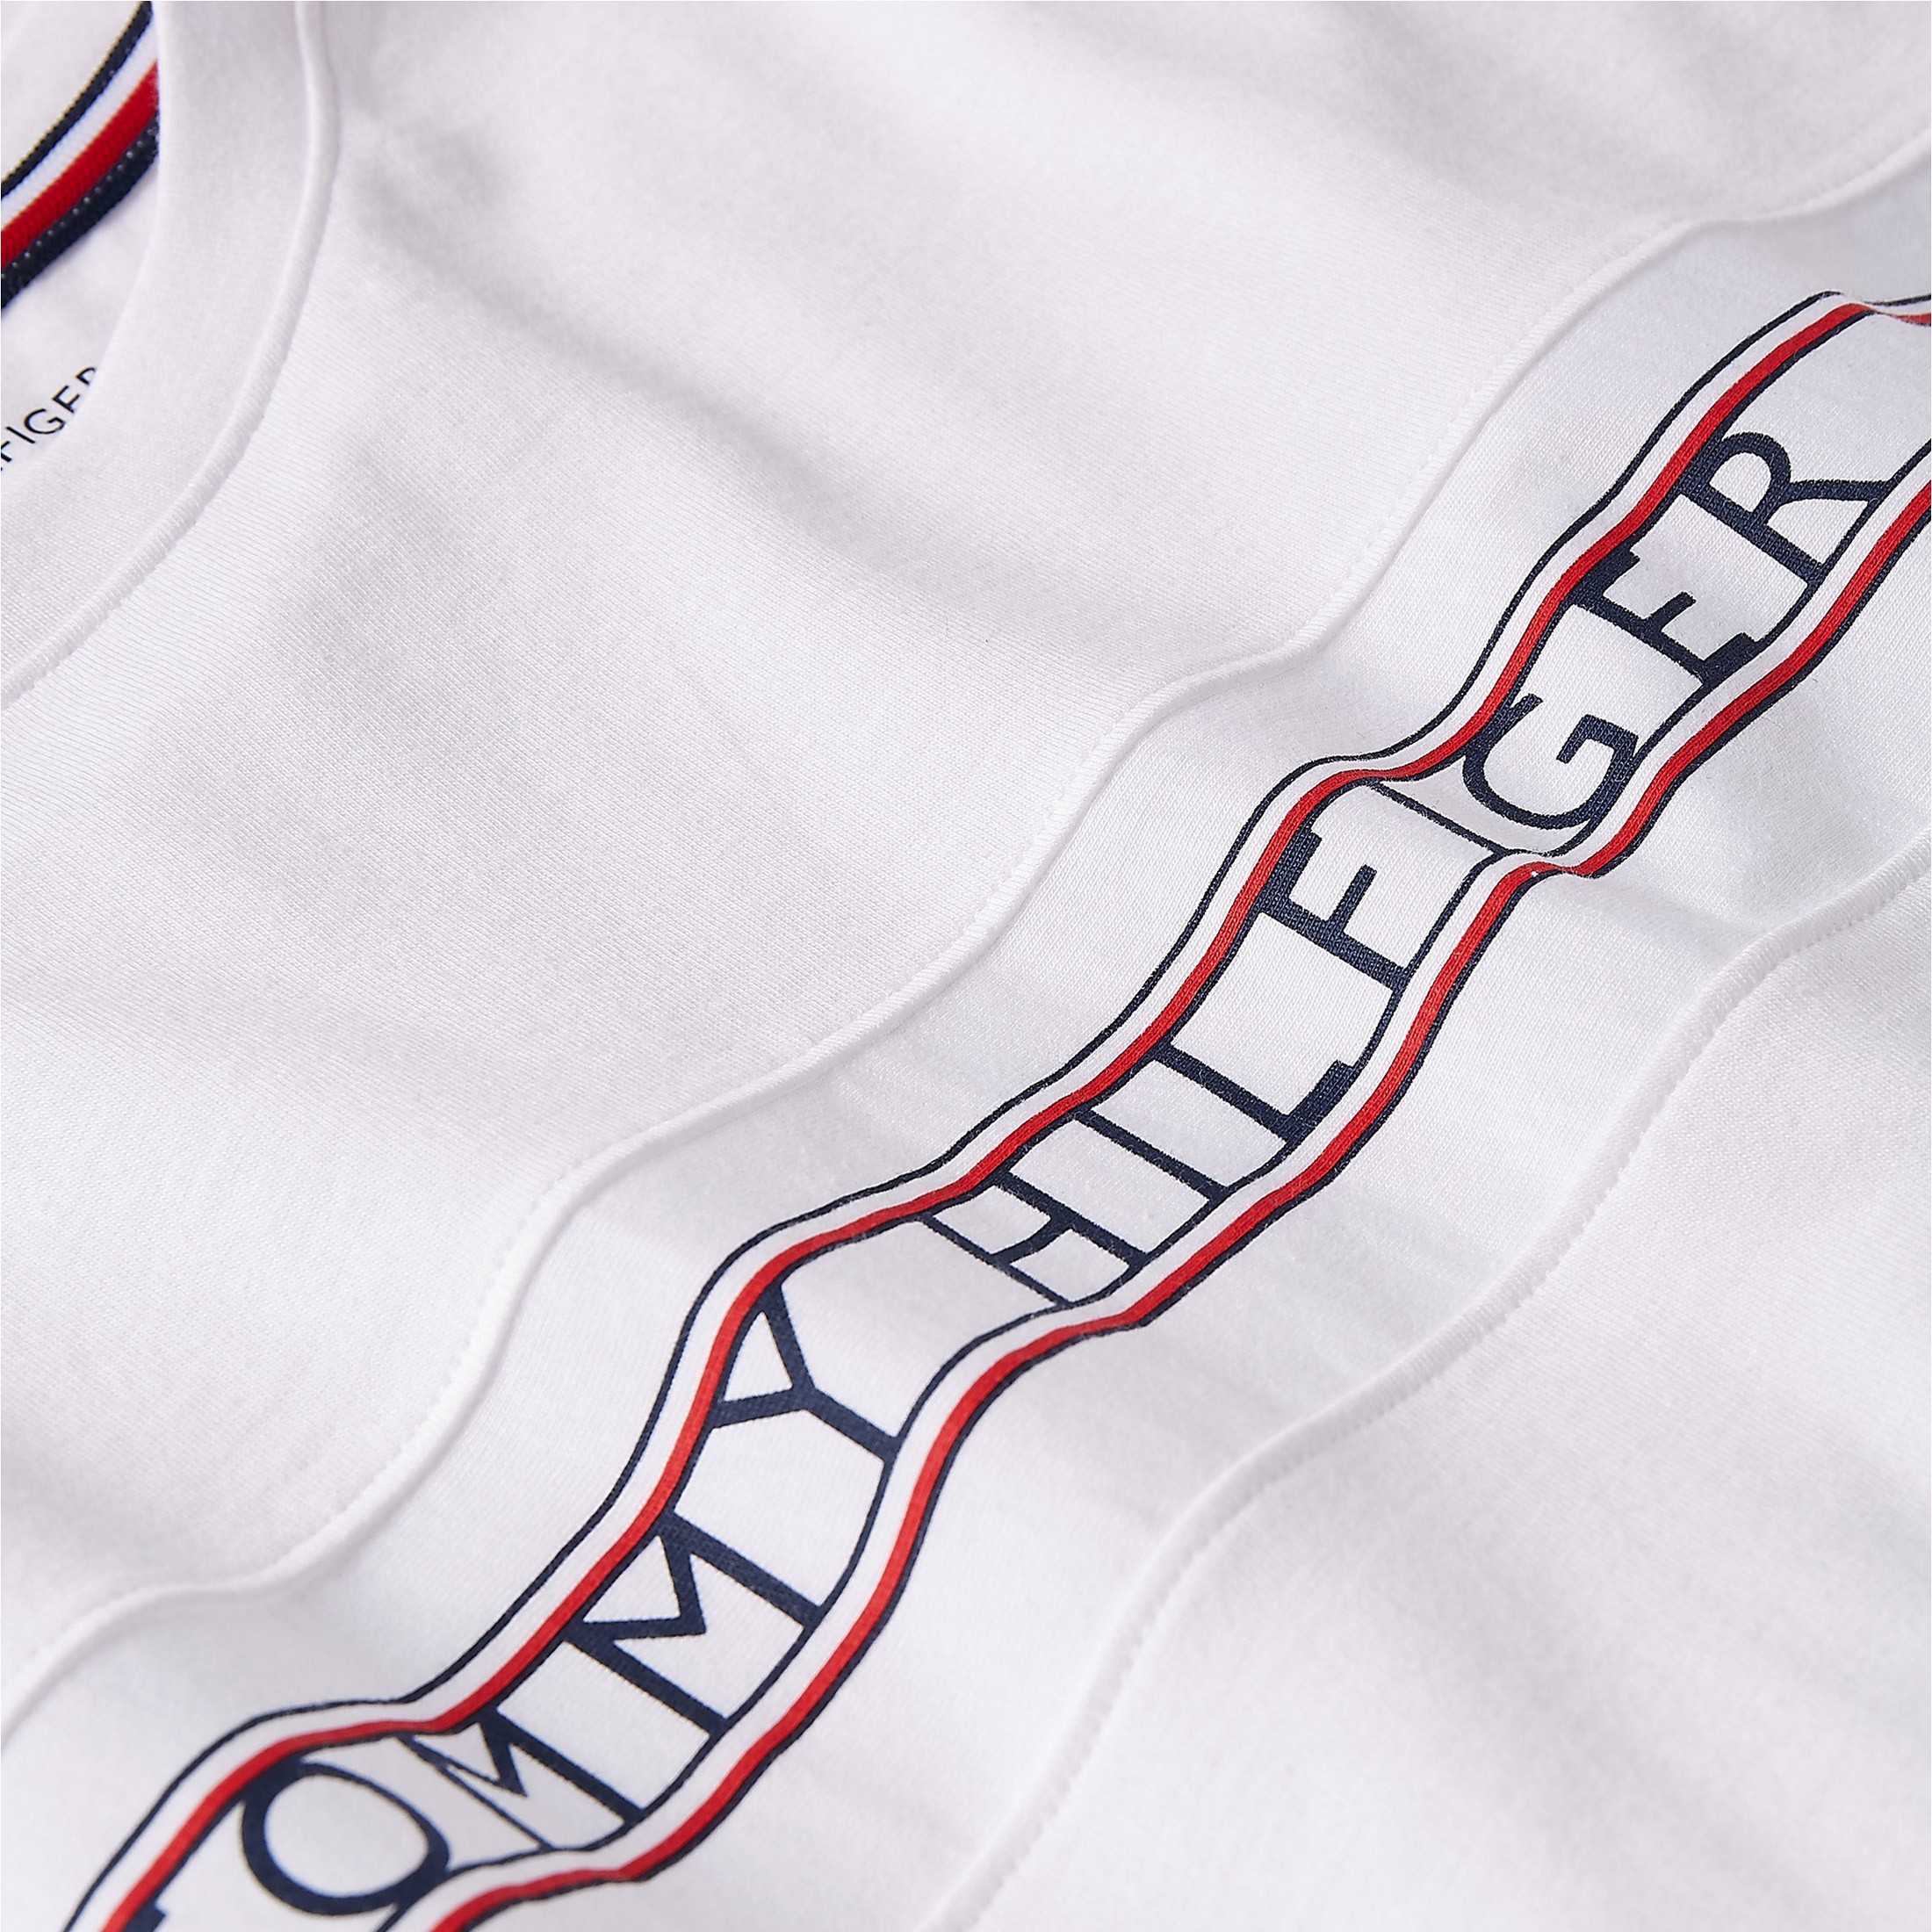 Tommy Signature Tape Logo T-Shirt - white: Tshirts for man brand To